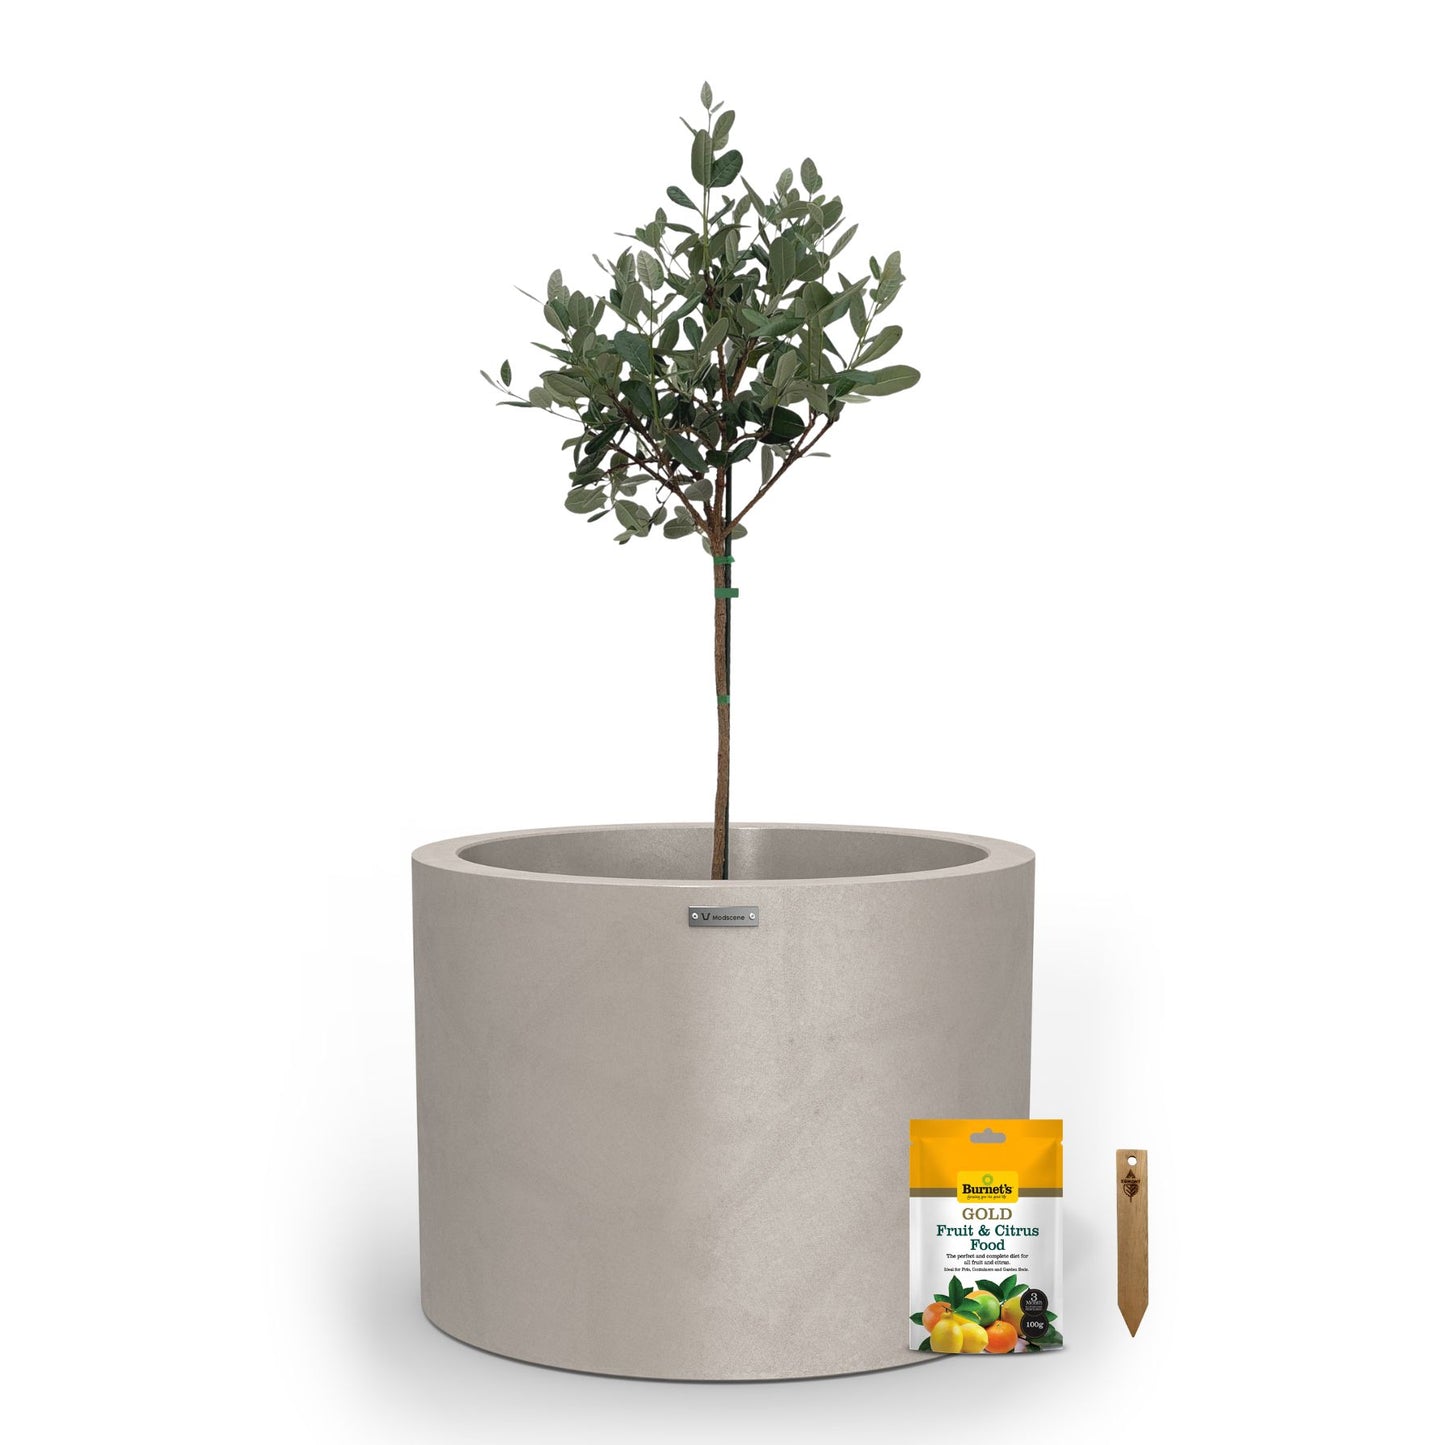 A large light brown planter pot used to plant fruit trees. 